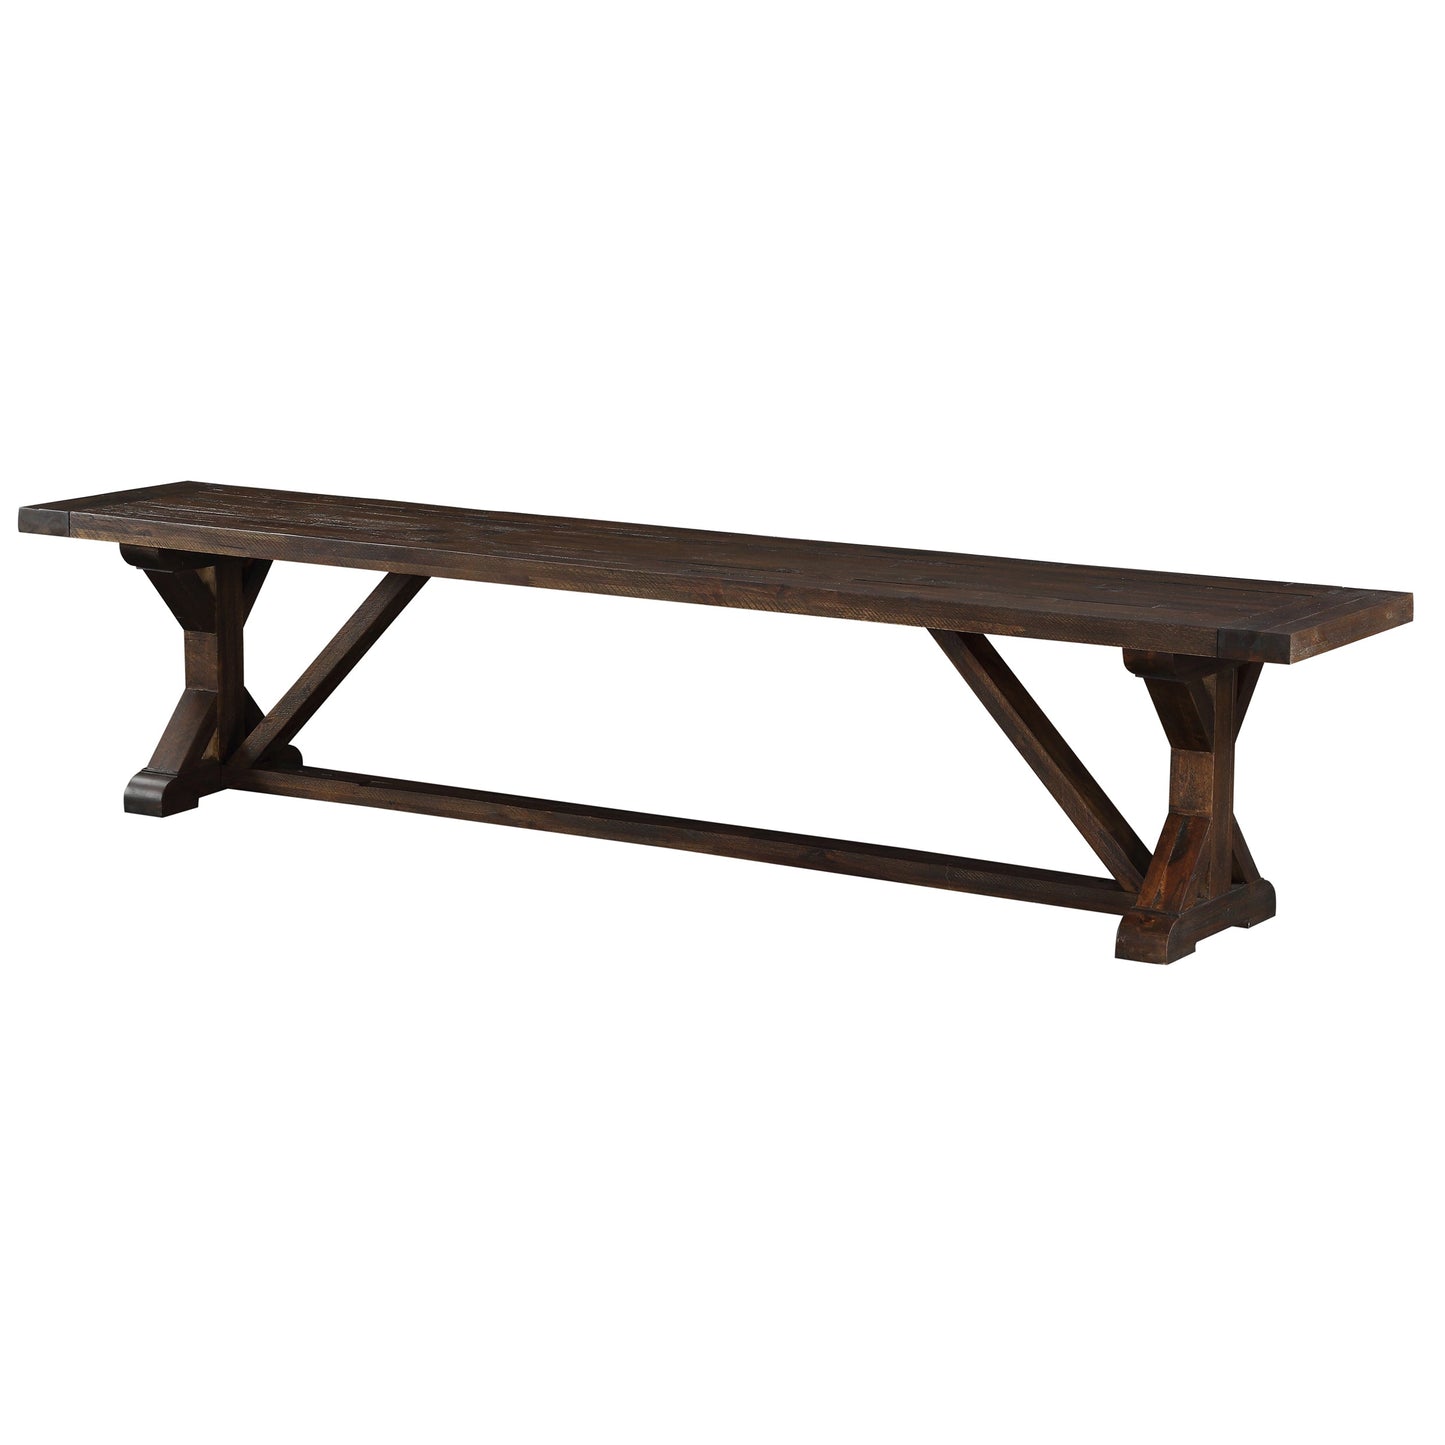 Modus Crossroads Cameron Bench in Antique Charcoal